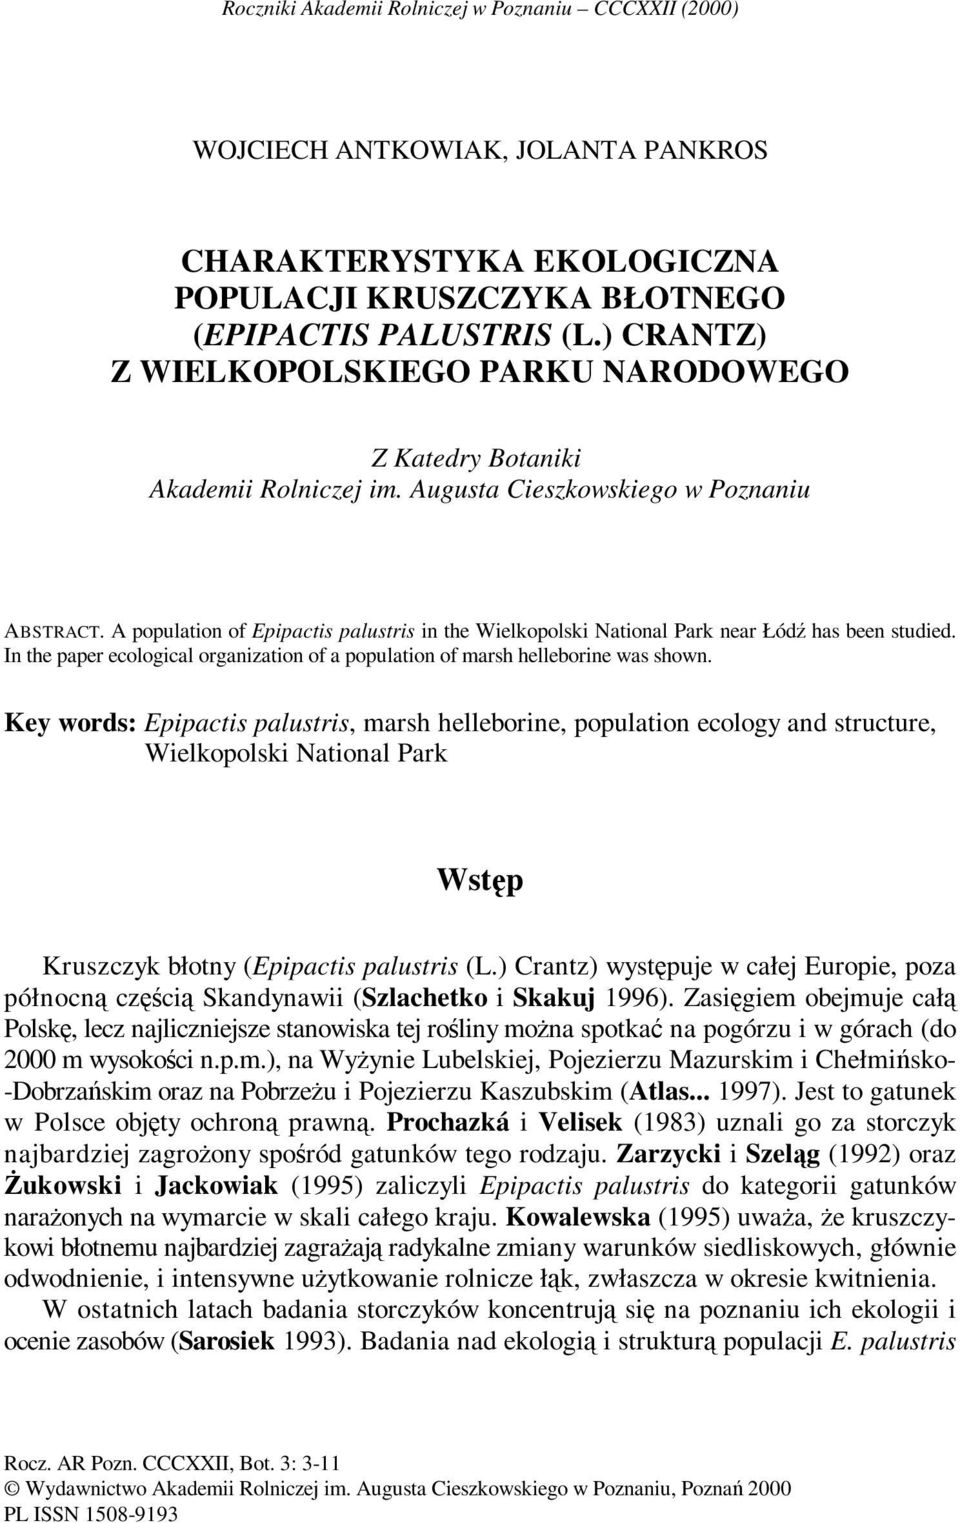 A population of Epipactis palustris in the Wielkopolski National Park near Łódź has been studied. In the paper ecological organization of a population of marsh helleborine was shown.